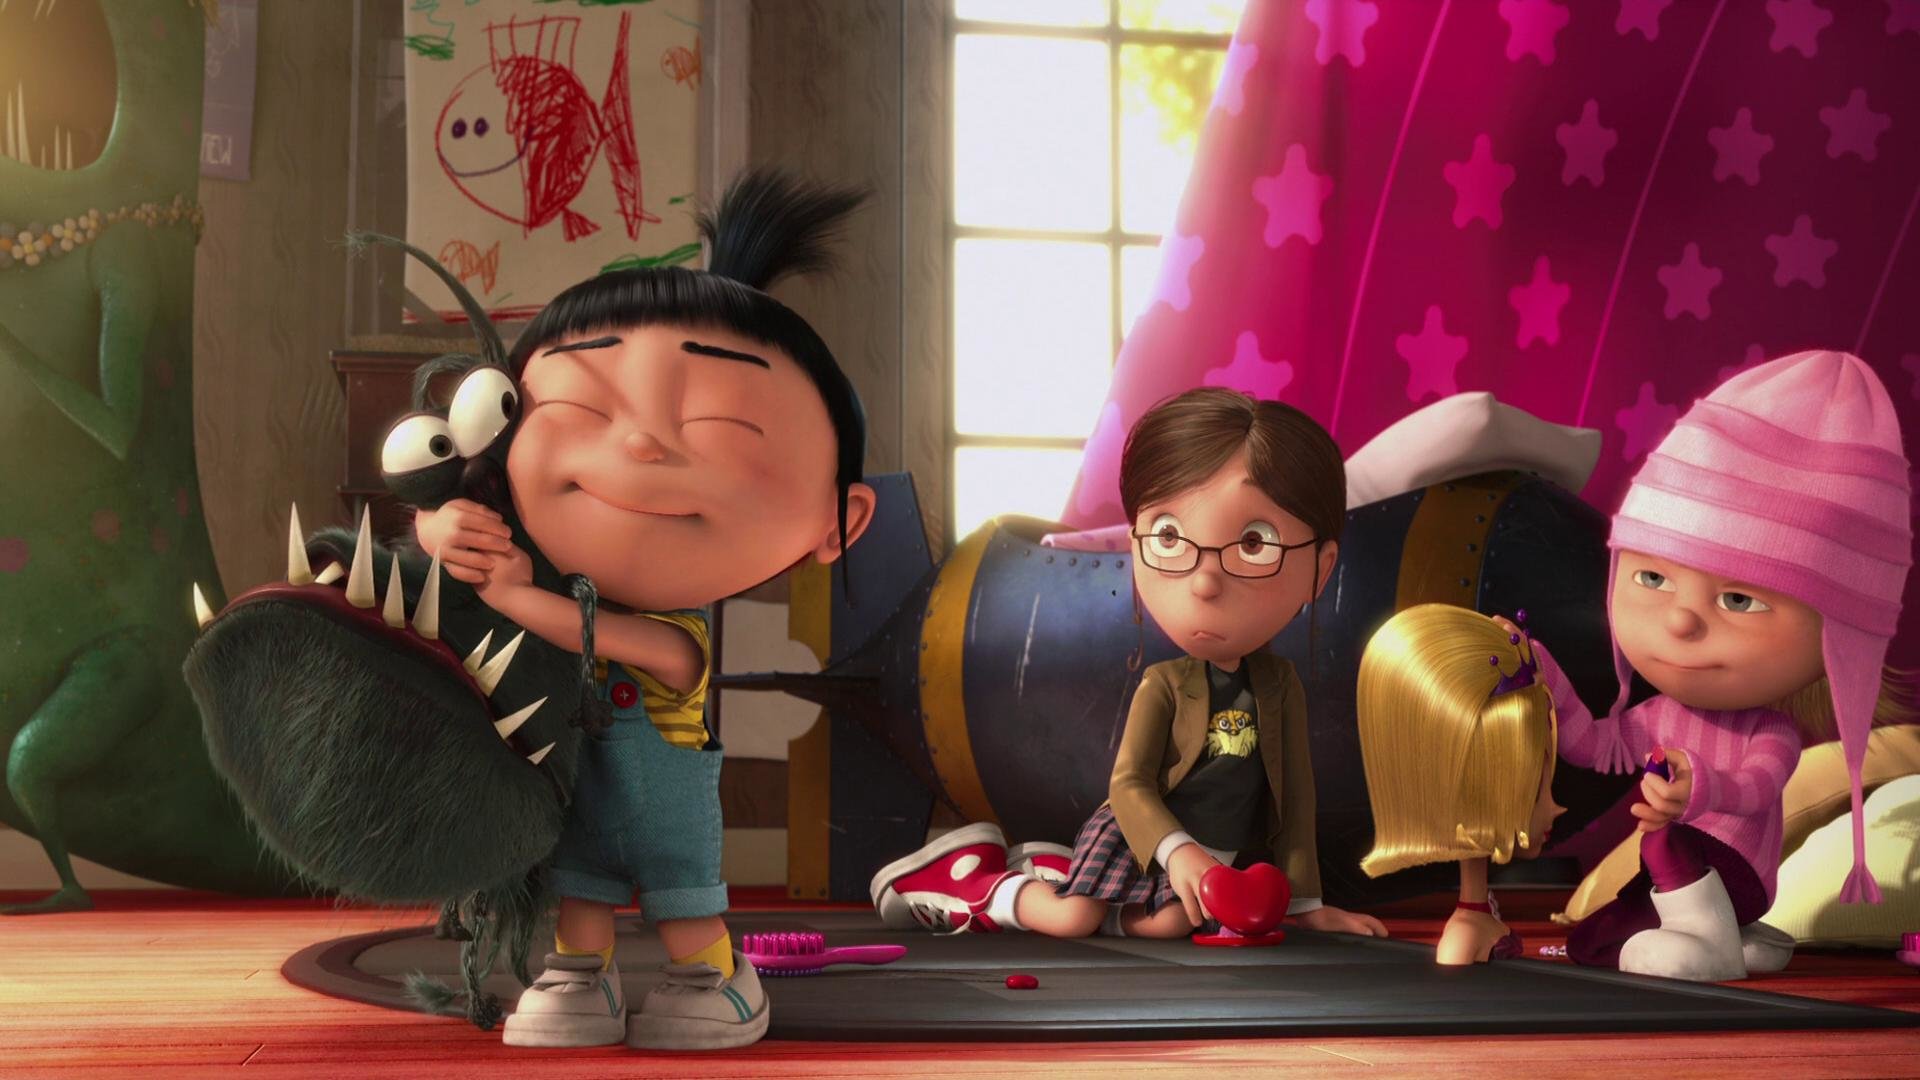 Free download Agnes From Despicable Me wallpaper 81844 821x973 for your  Desktop Mobile  Tablet  Explore 42 Agnes Despicable Me Wallpaper  Despicable  Me Wallpapers Despicable Me Backgrounds Despicable Me Wallpaper Minions